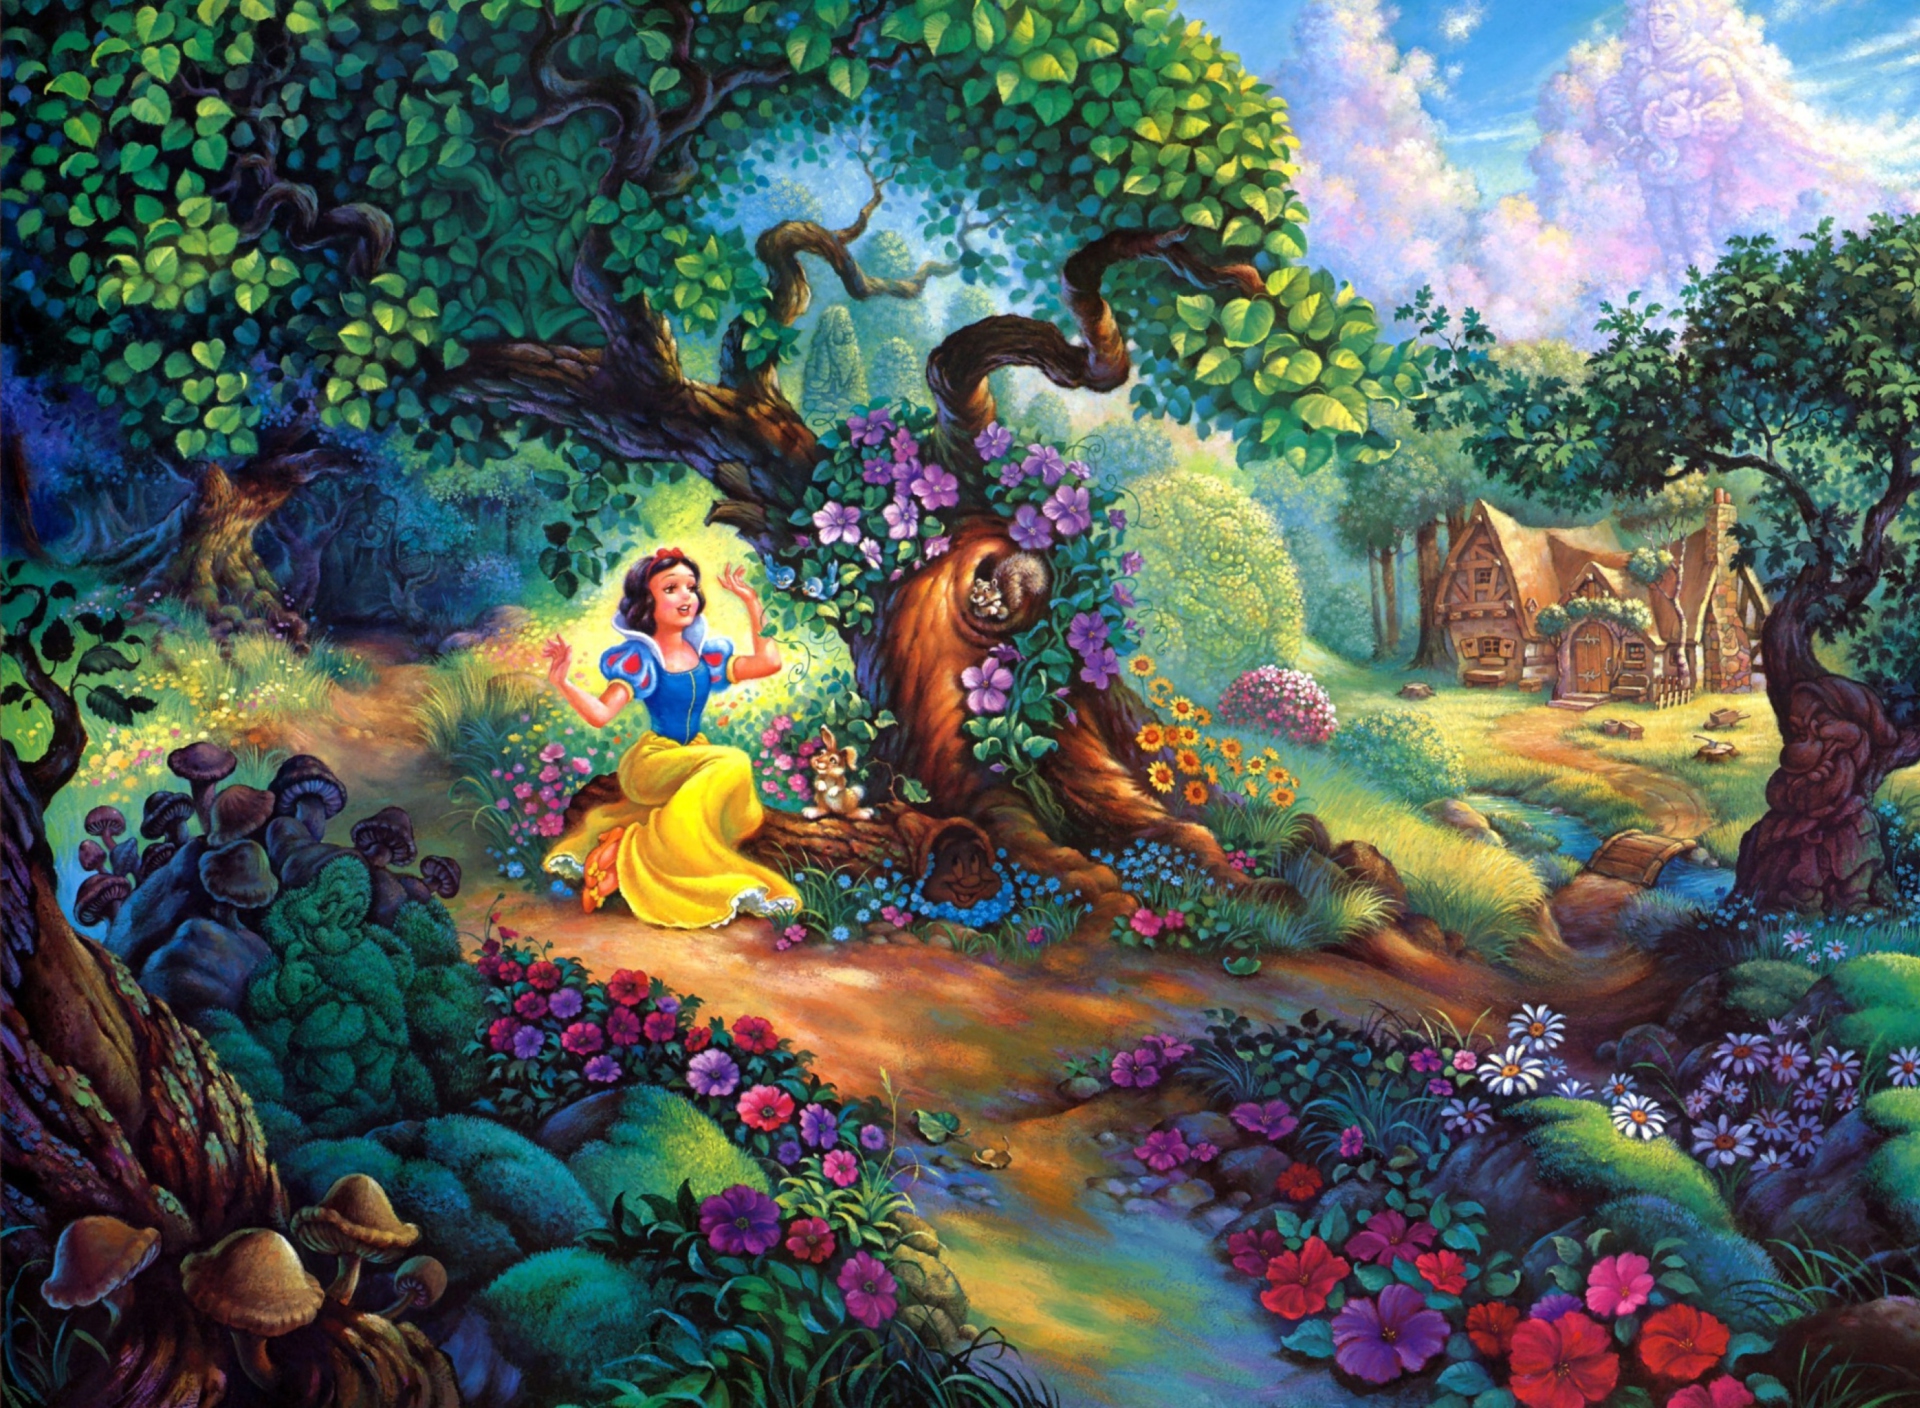 Snow White In Magical Forest wallpaper 1920x1408